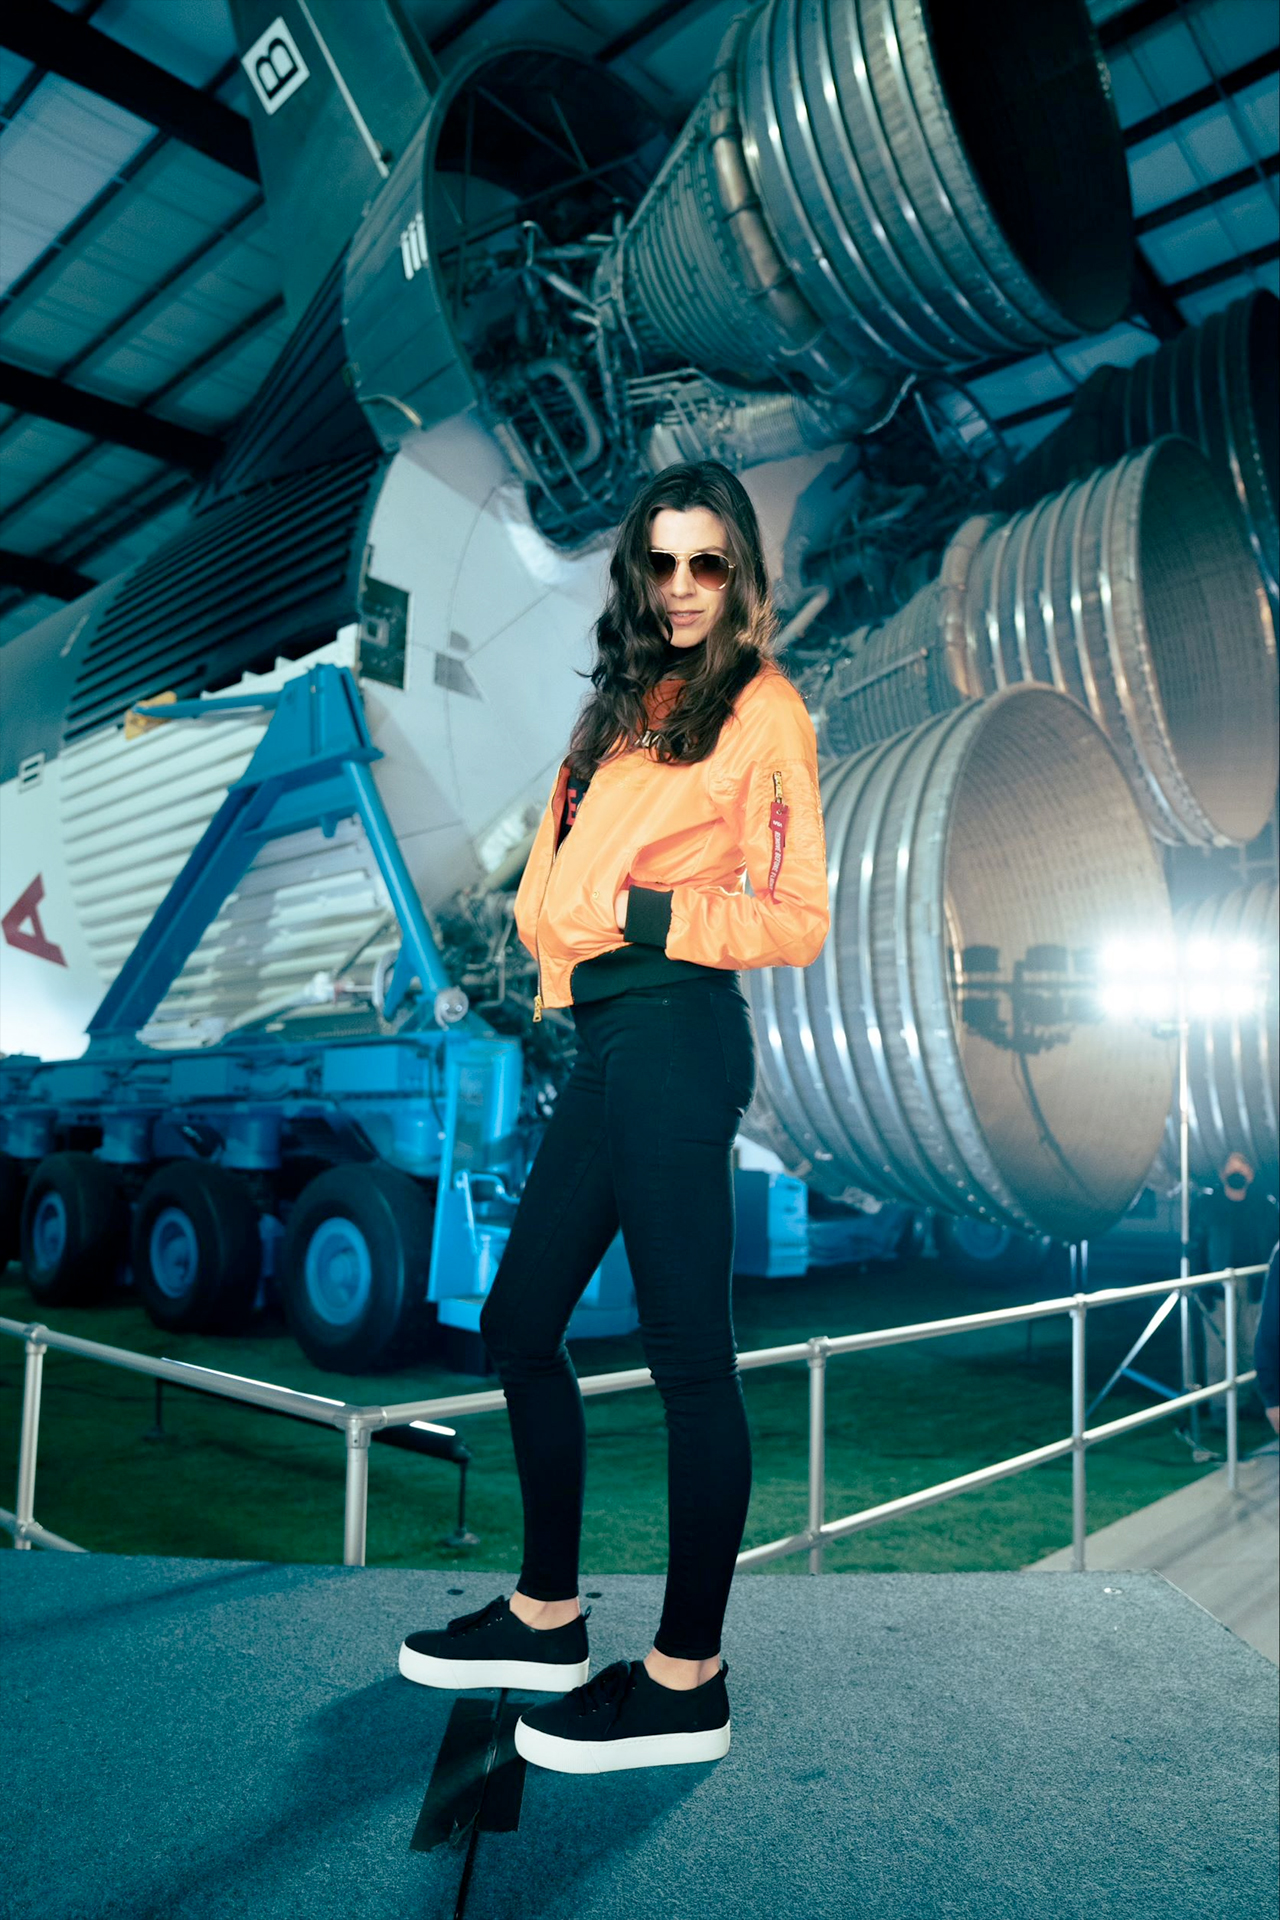 Singer-songwriter Katie Toupin will perform at Space Center Houston.